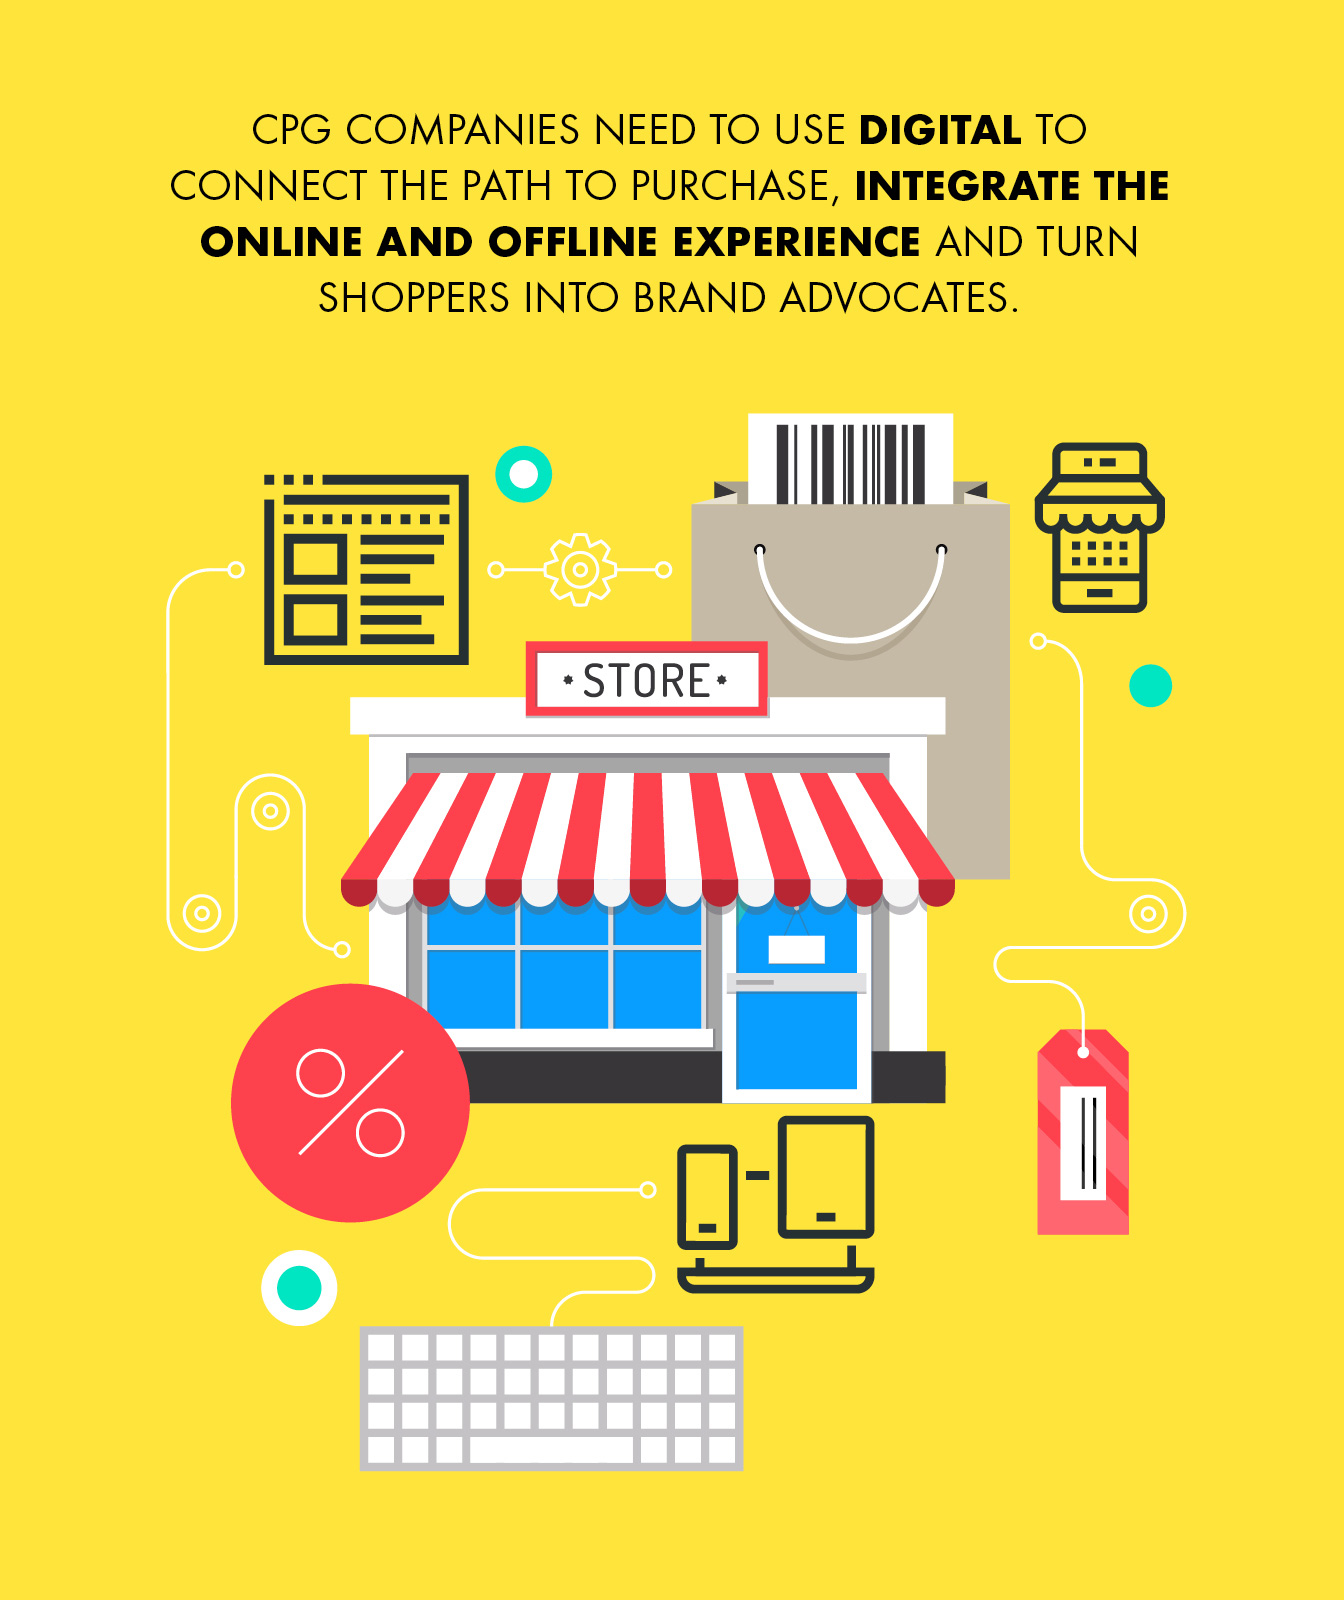 "CPG companies need to use digital to connect the path to purchase, integrate the online and offline experience and turn shoppers into brand advocates.